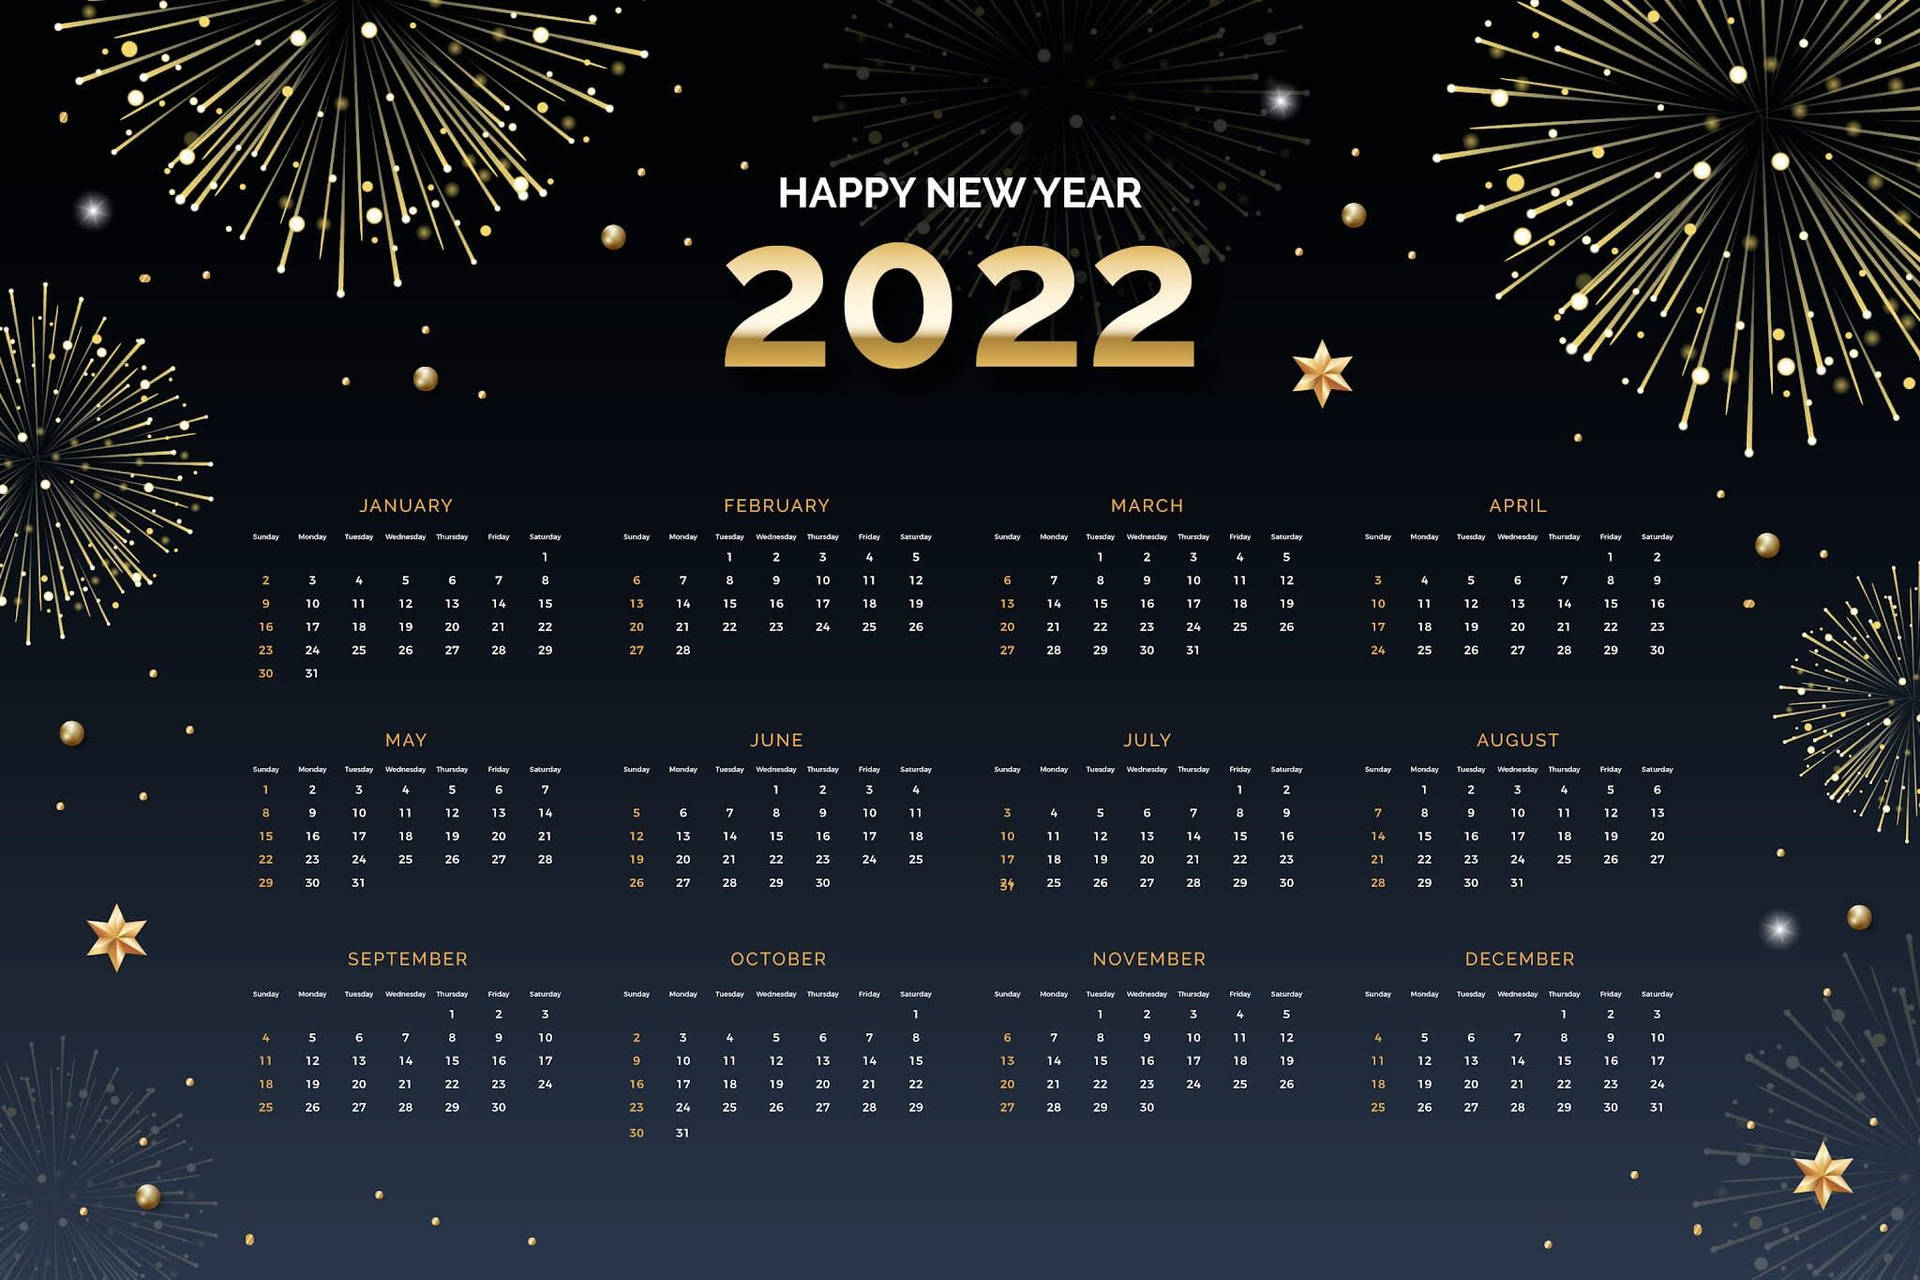 2022 Calendar With Fireworks Picture